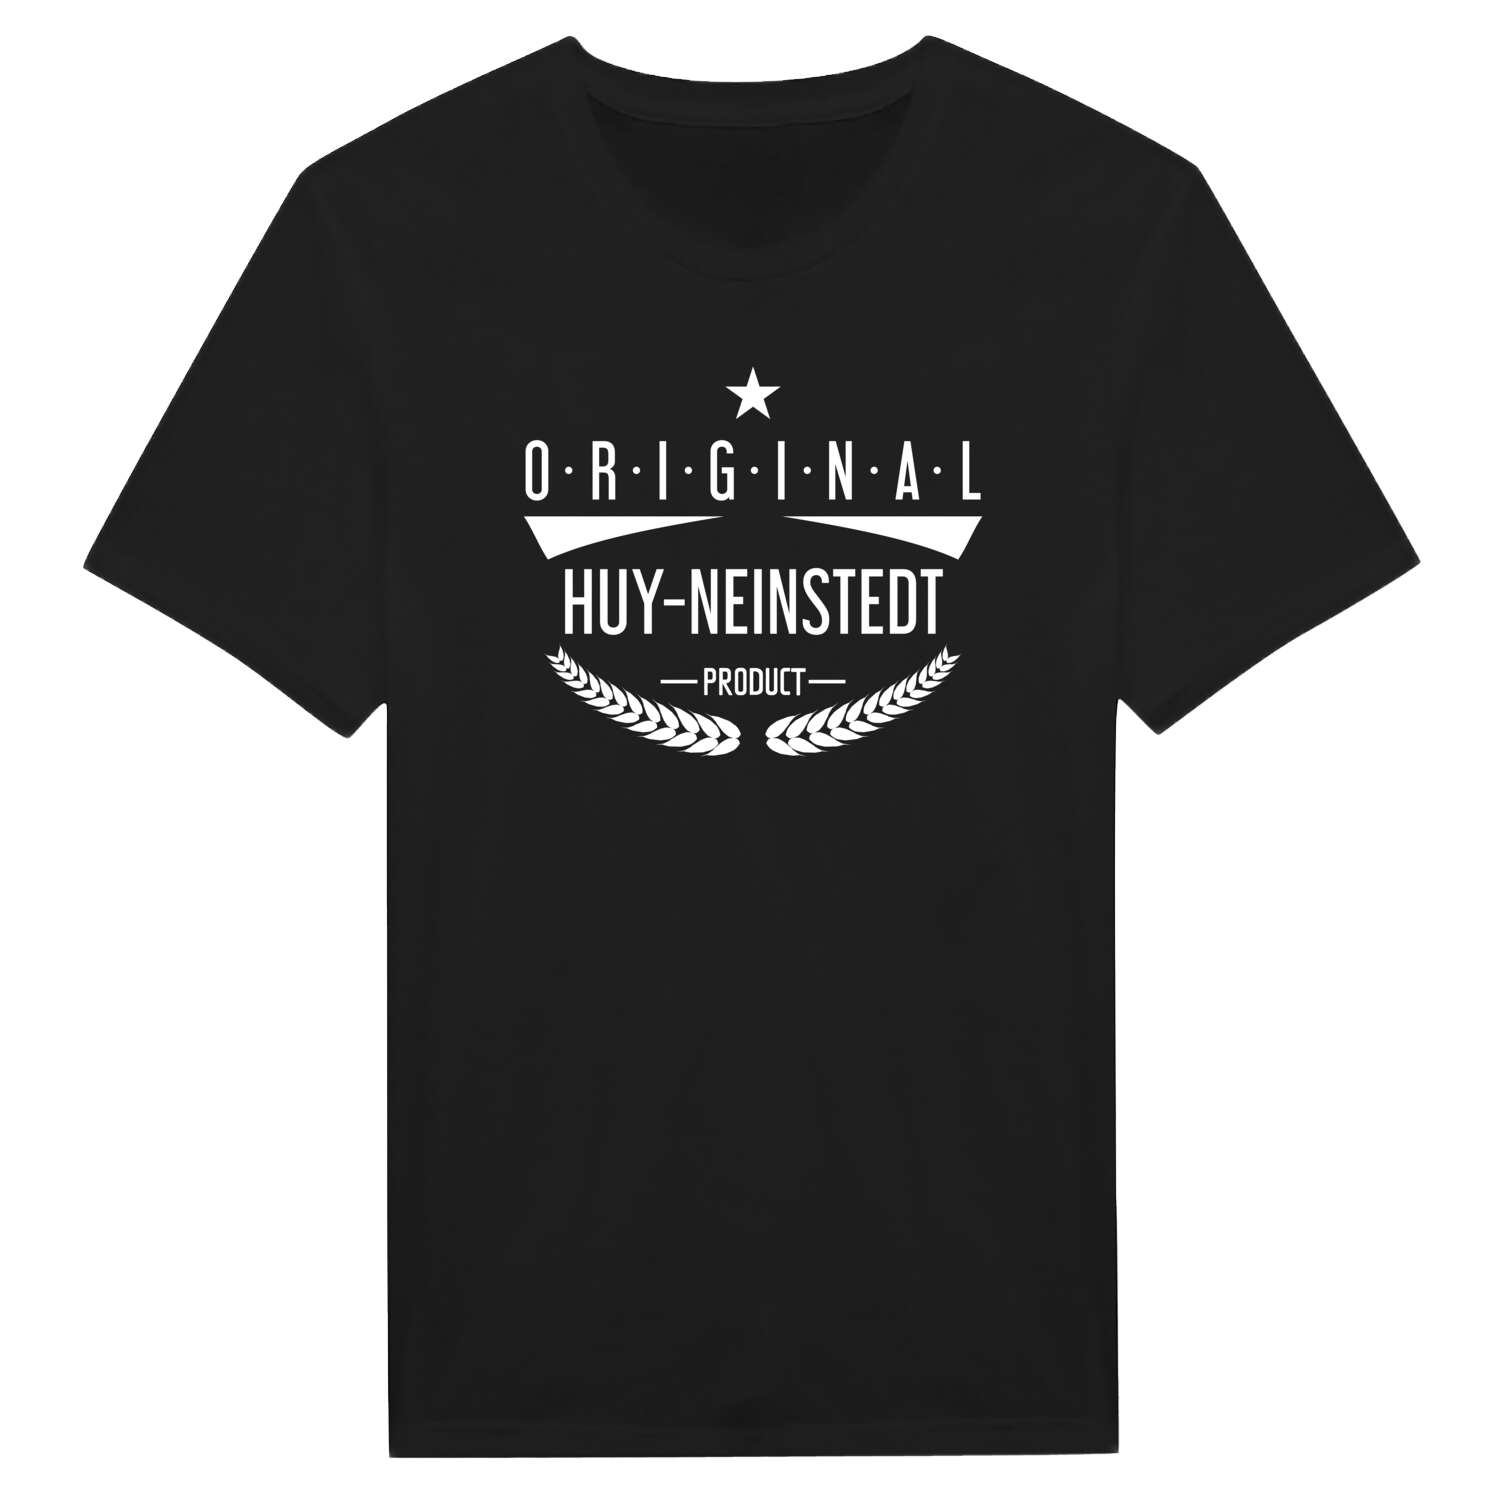 Huy-Neinstedt T-Shirt »Original Product«